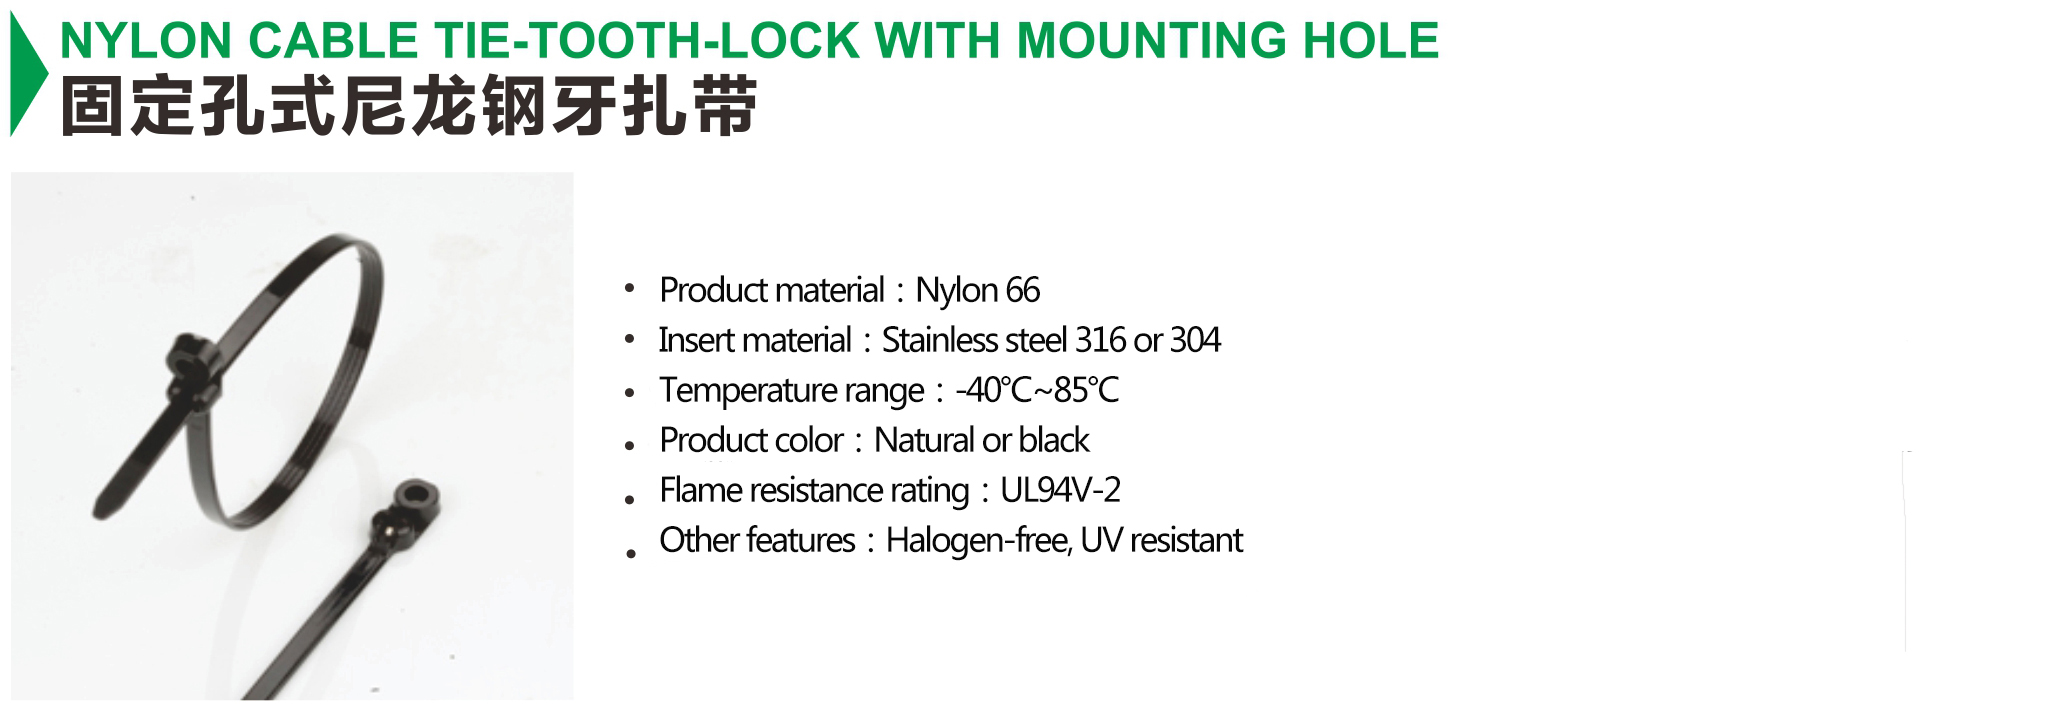 NYLON CABLE TIE-TOOTH-LOCK WITH MOUNTING HOLE